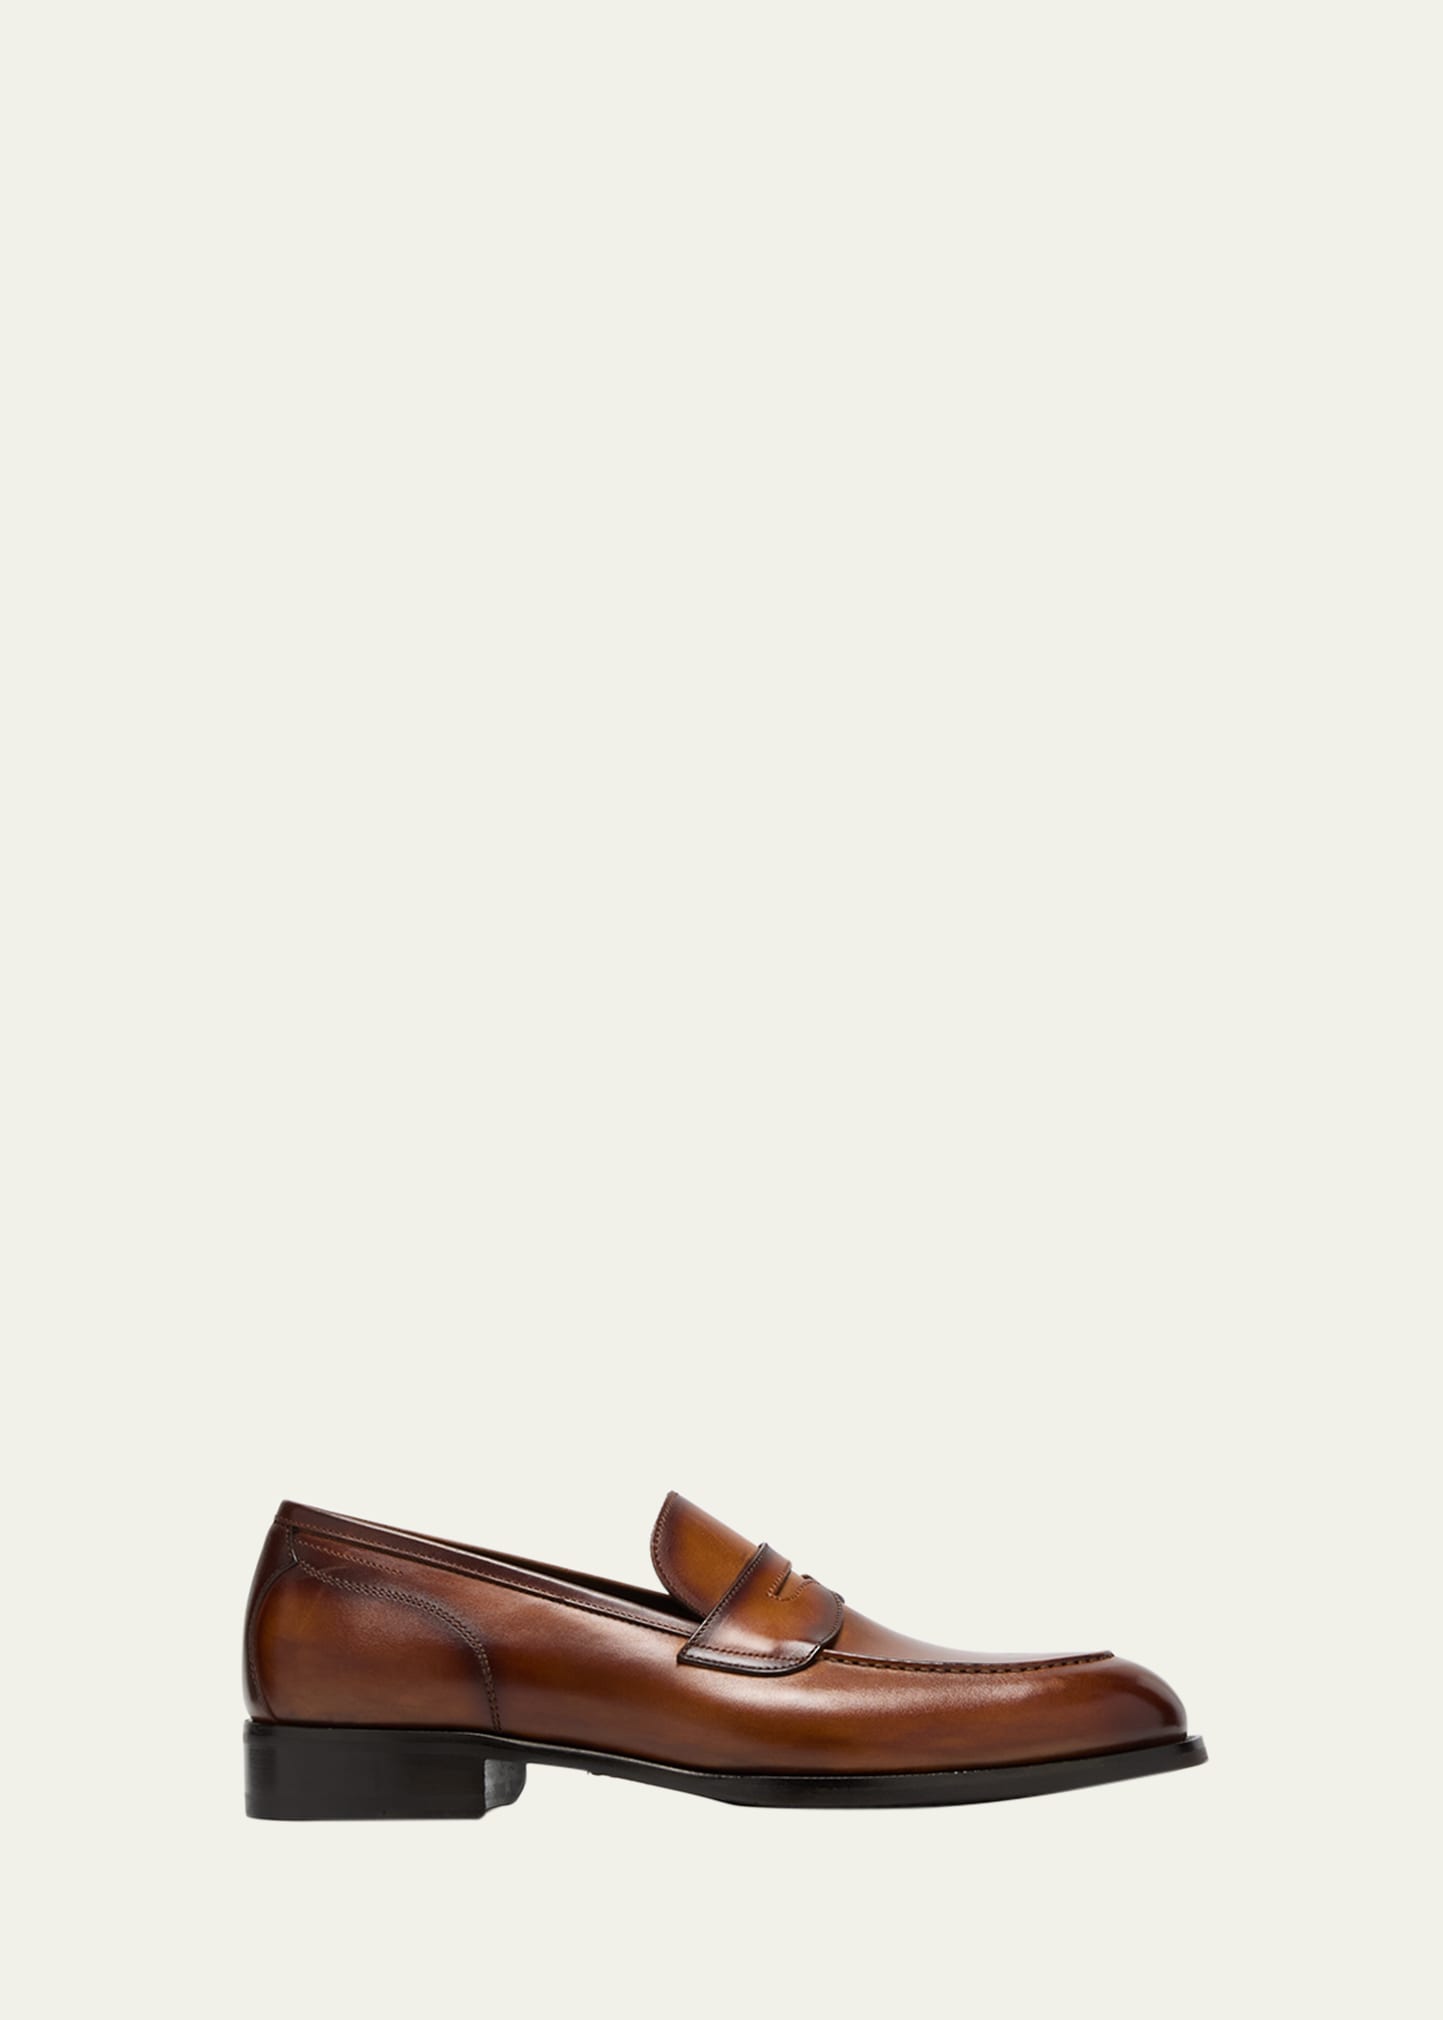 Men's Miseno Calf Leather Penny Loafers